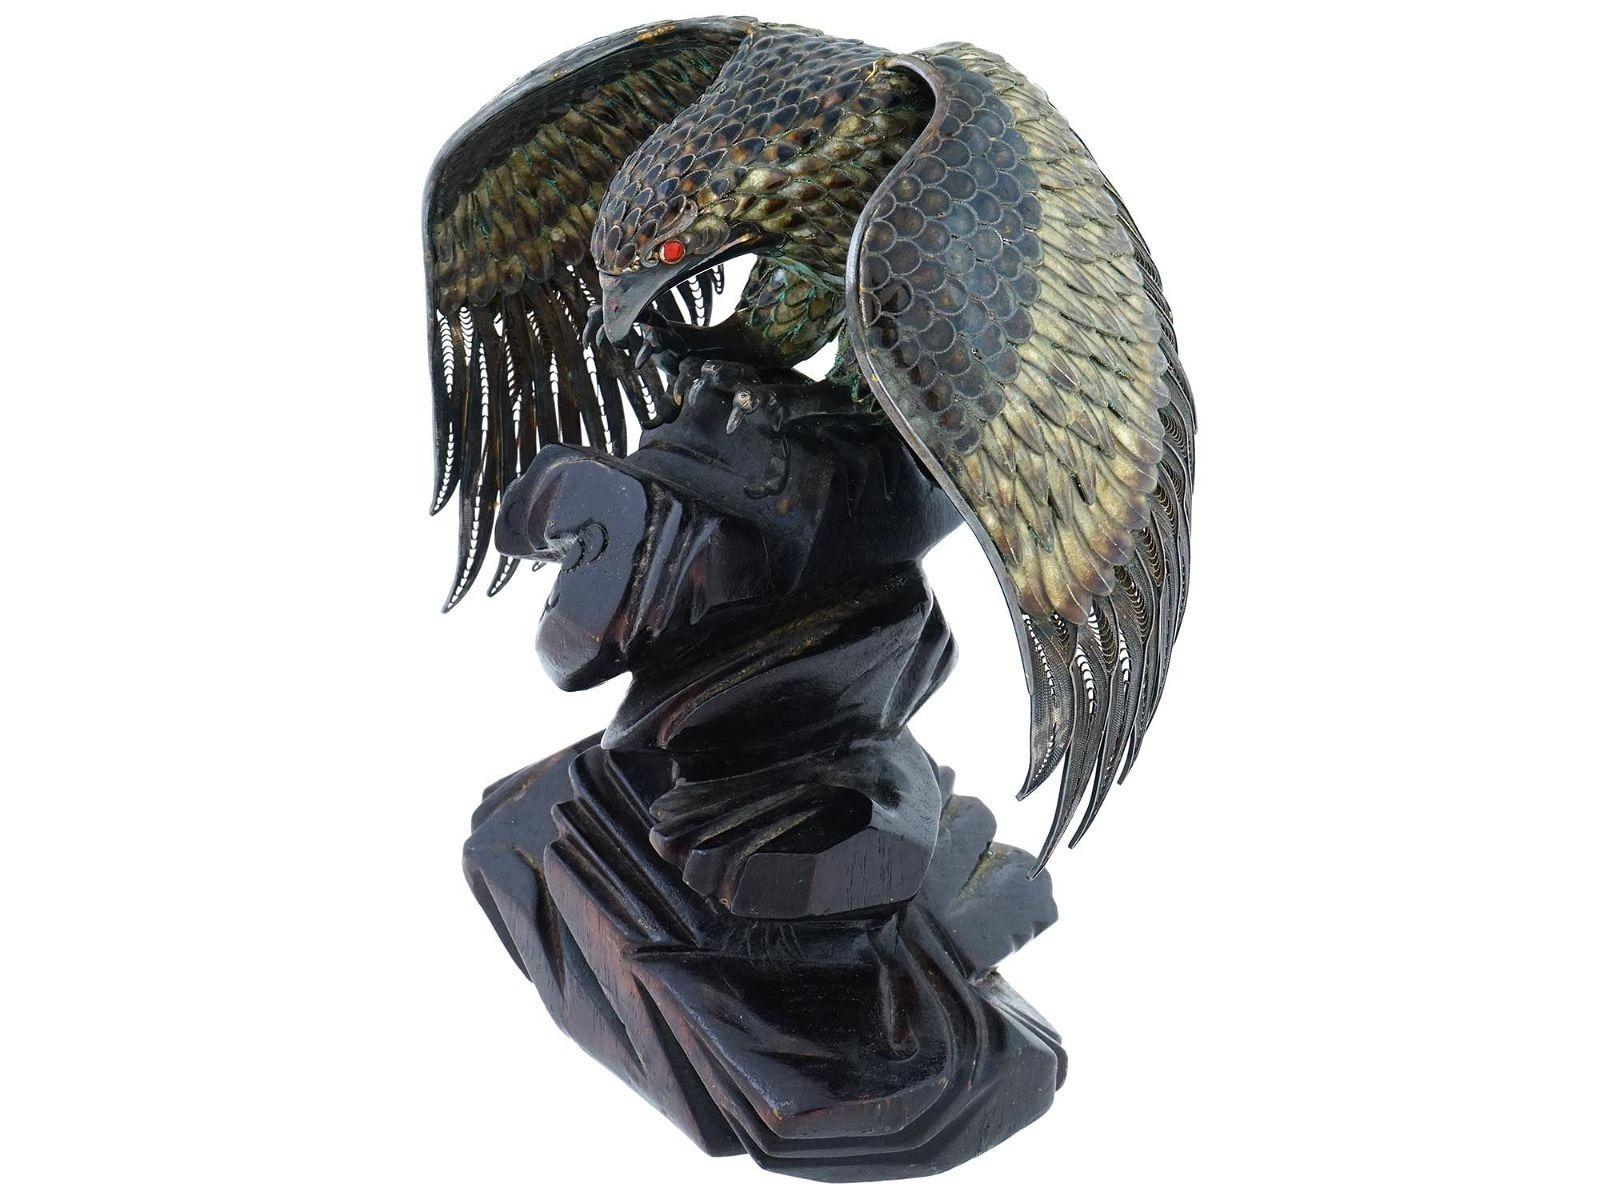 Beautiful vintage figurine of a perched eagle with spread wings finely crafted from silver filigree with enamel feathers, mounted on ebonized wooden rock form base.  With high degree of tarnish but in excellent condition.  7 3/4 inches tall.